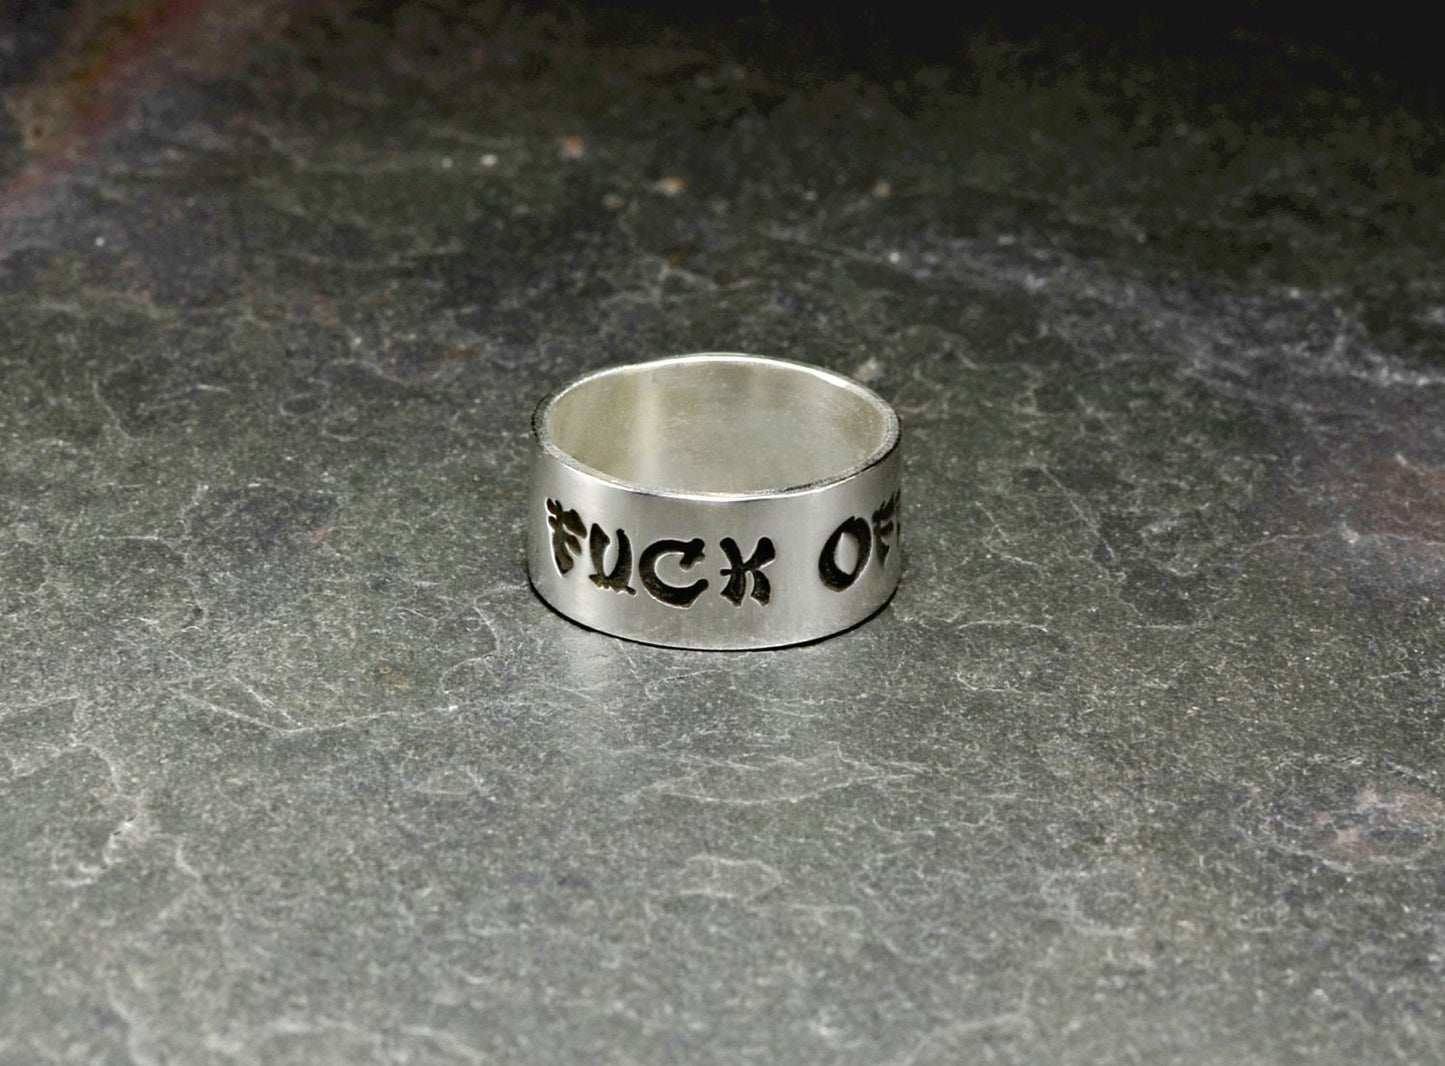 F'ck off sterling silver ring in Geisha font